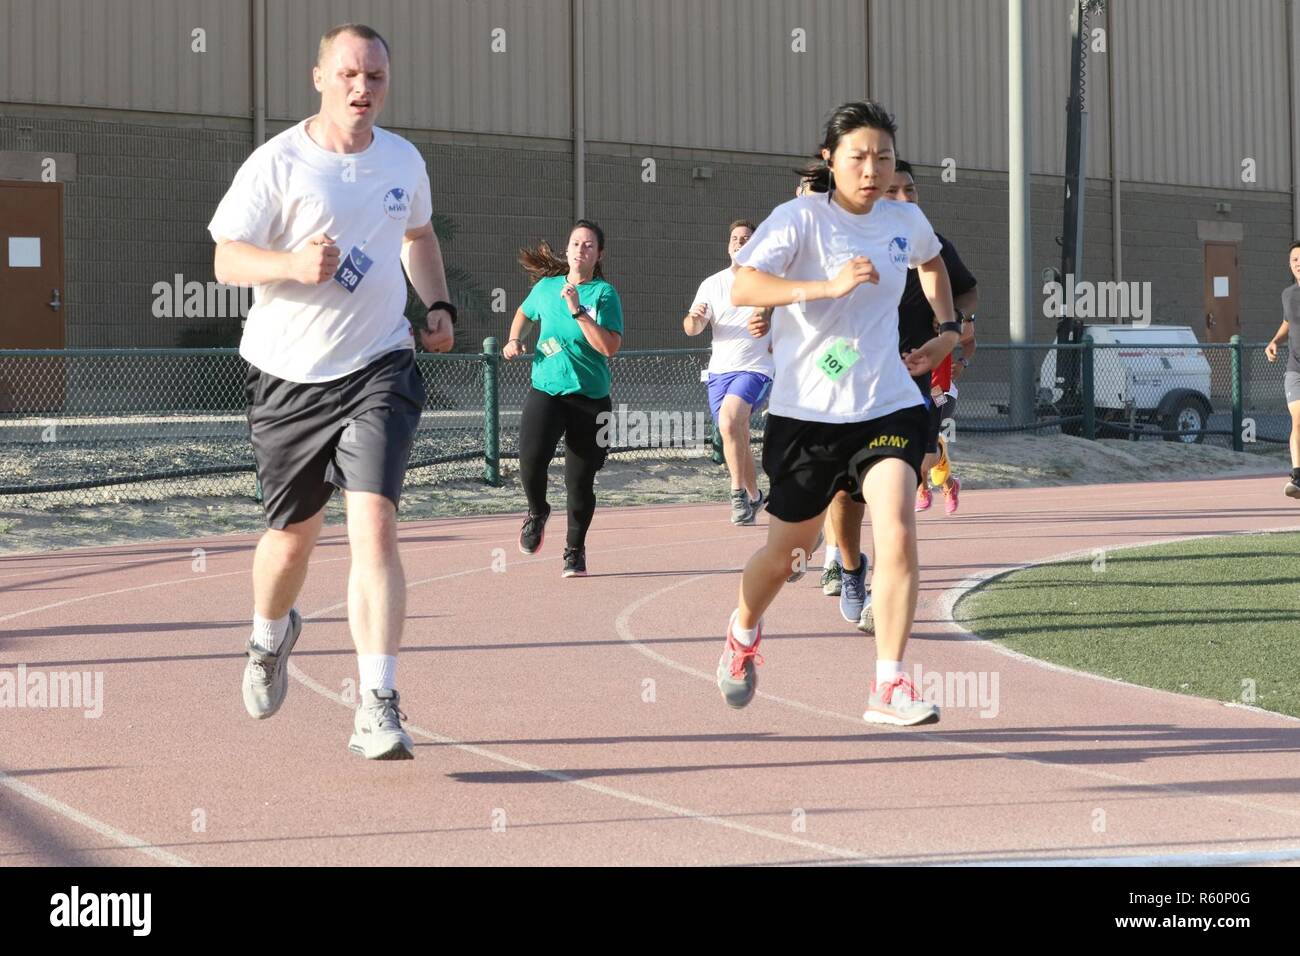 U.S. Servicemembers dash to the finish line at the Army Reserve 5k Walk or Run, April 22, at Camp Arifjan, Kuwait. The Army Reserve Engagement Cell hosted this annual event, as part of a celebratory day geared to honoring the men and women who serve in the U.S. Army Reserves. Stock Photo